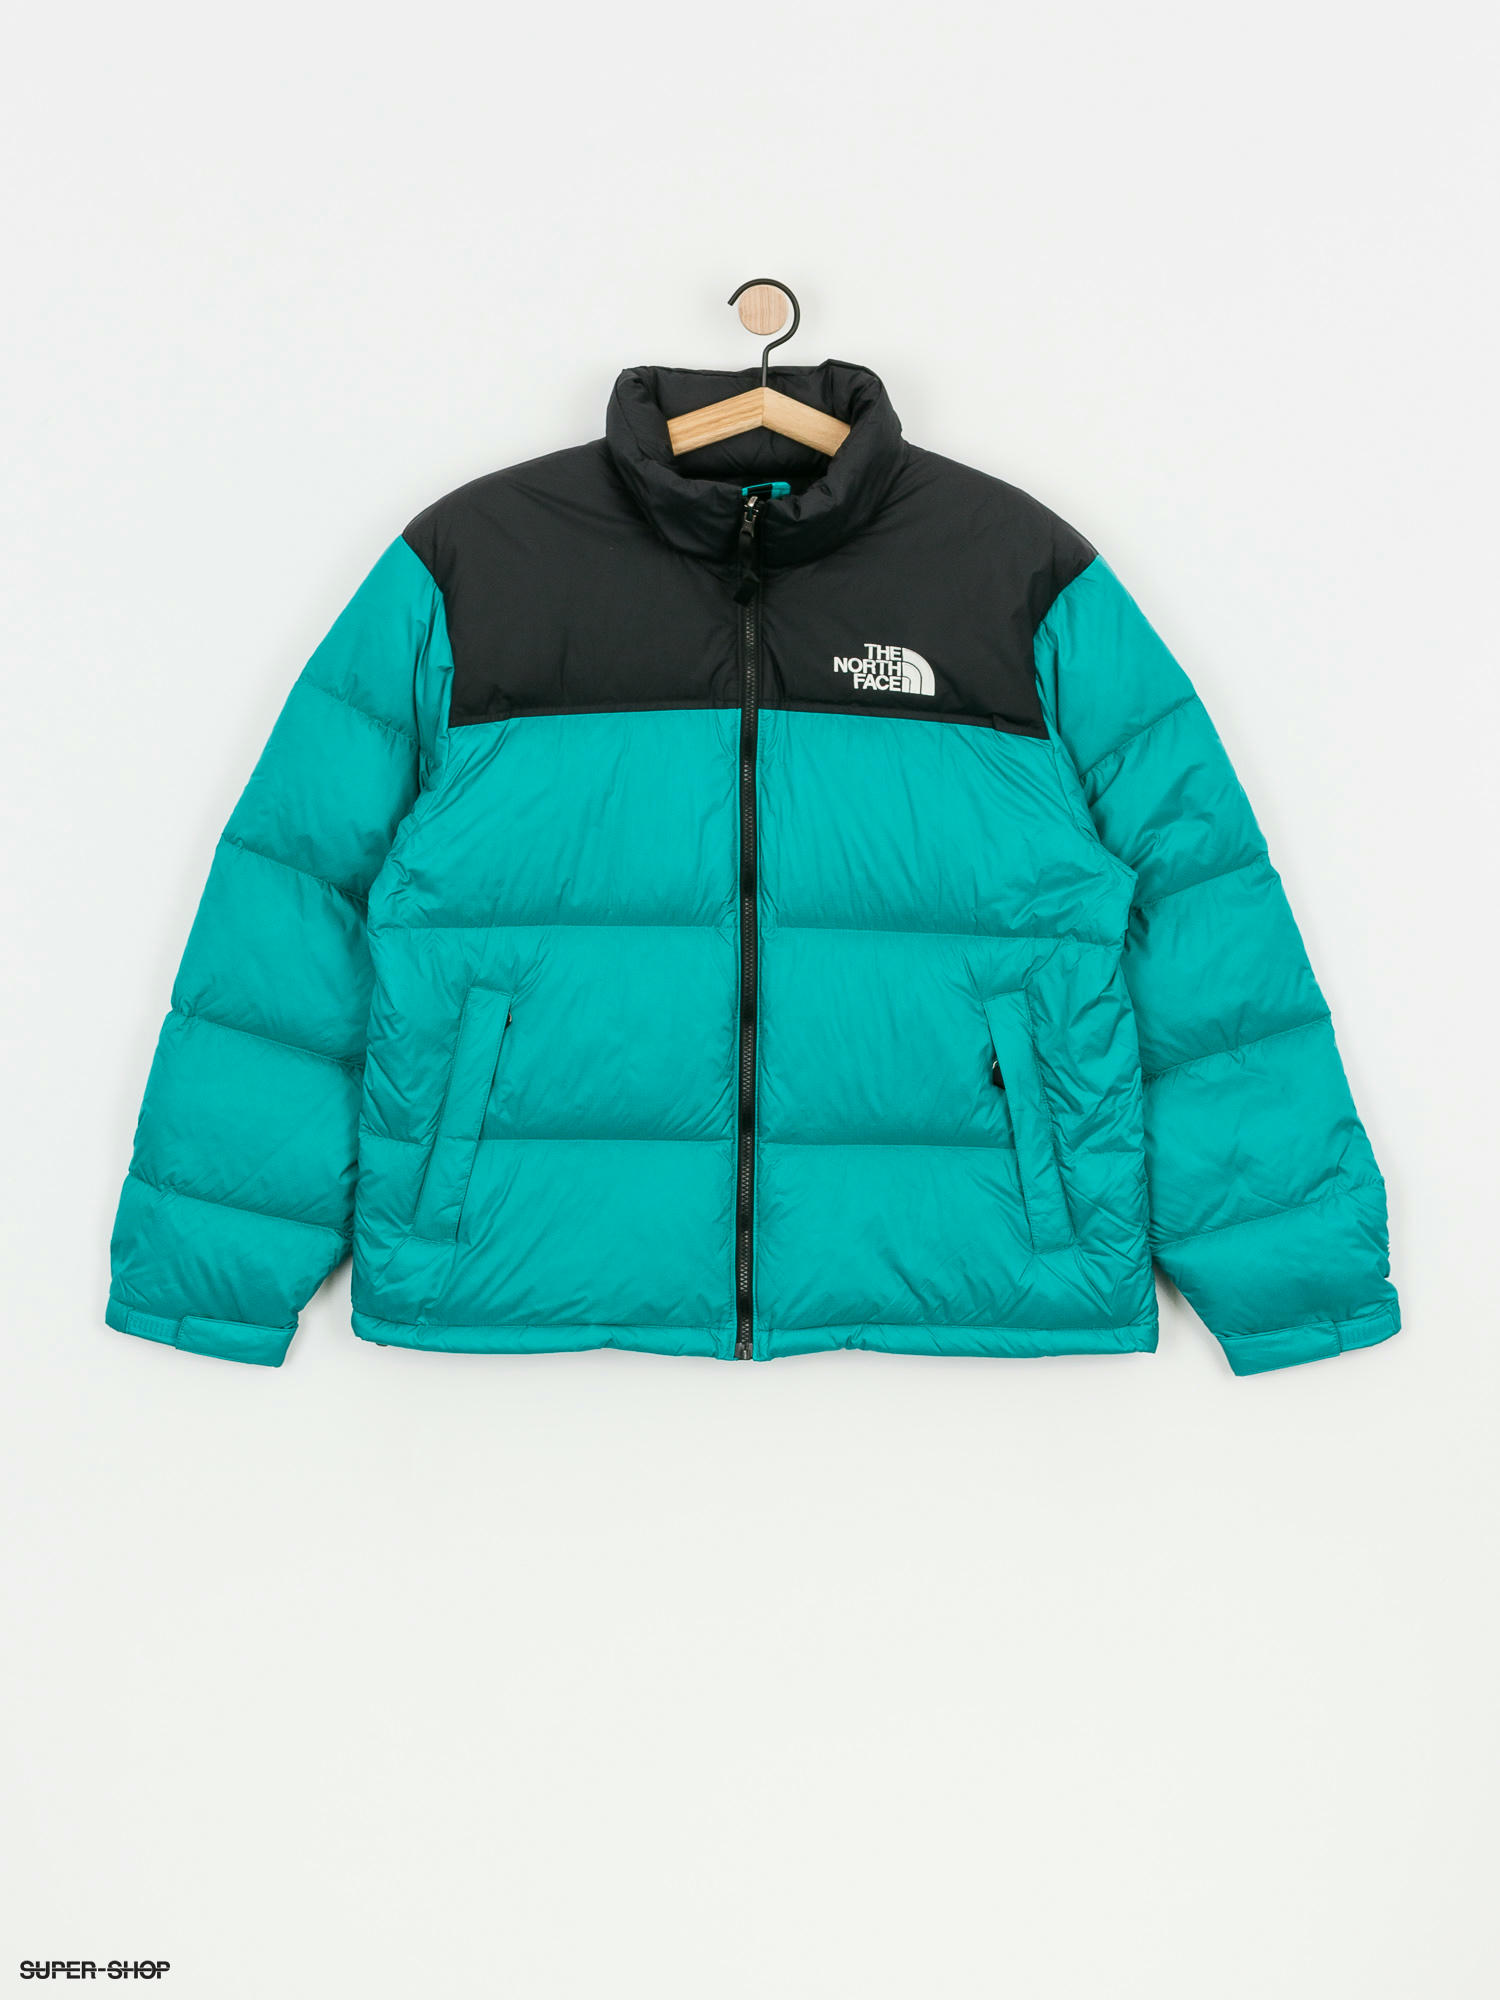 north face mint green jacket